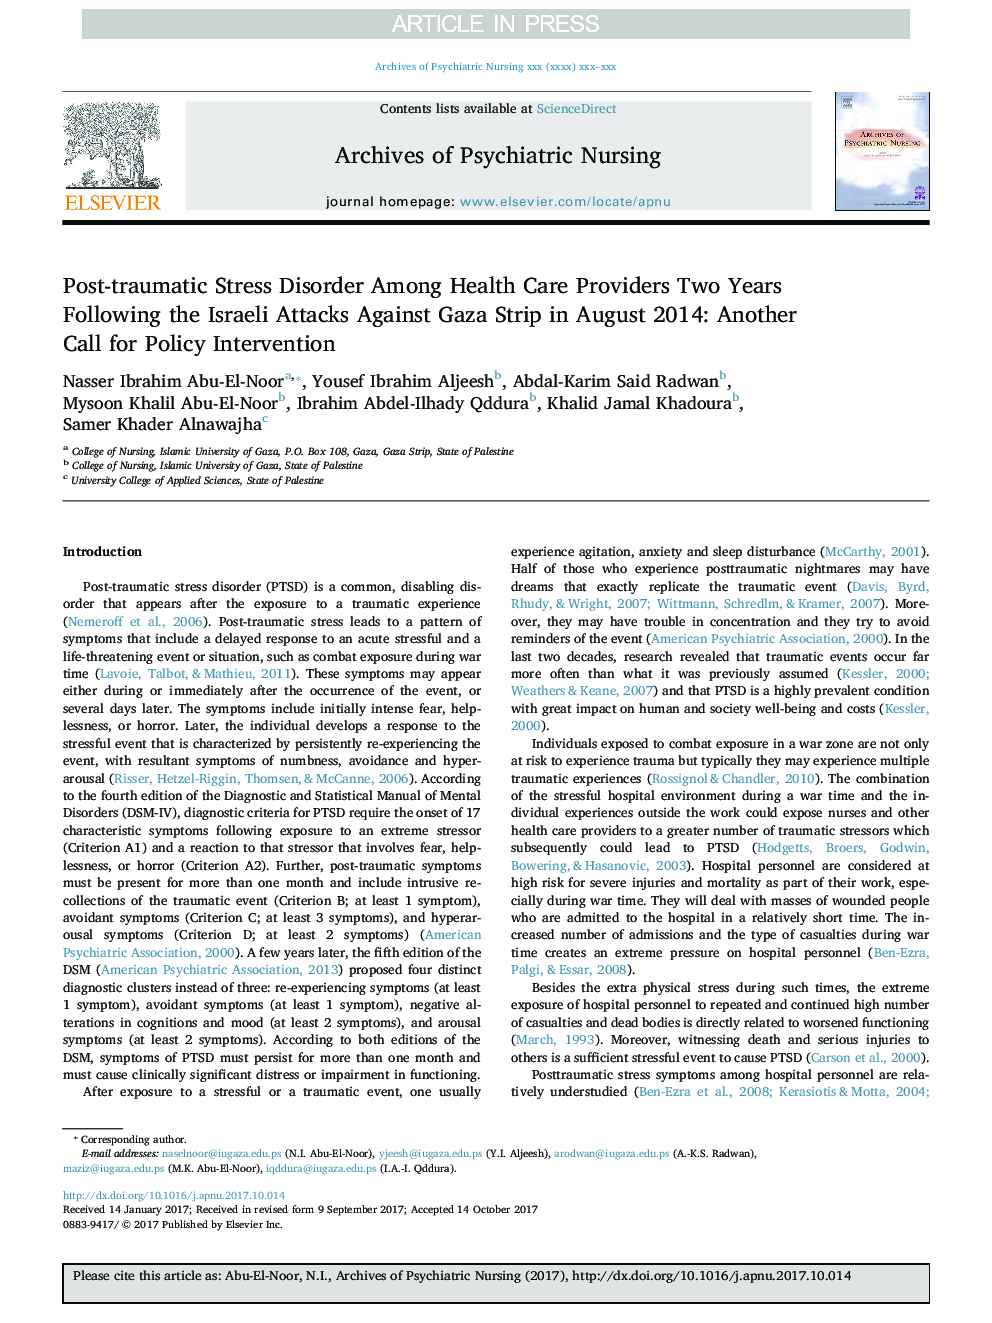 Post-traumatic Stress Disorder Among Health Care Providers Two Years Following the Israeli Attacks Against Gaza Strip in August 2014: Another Call for Policy Intervention